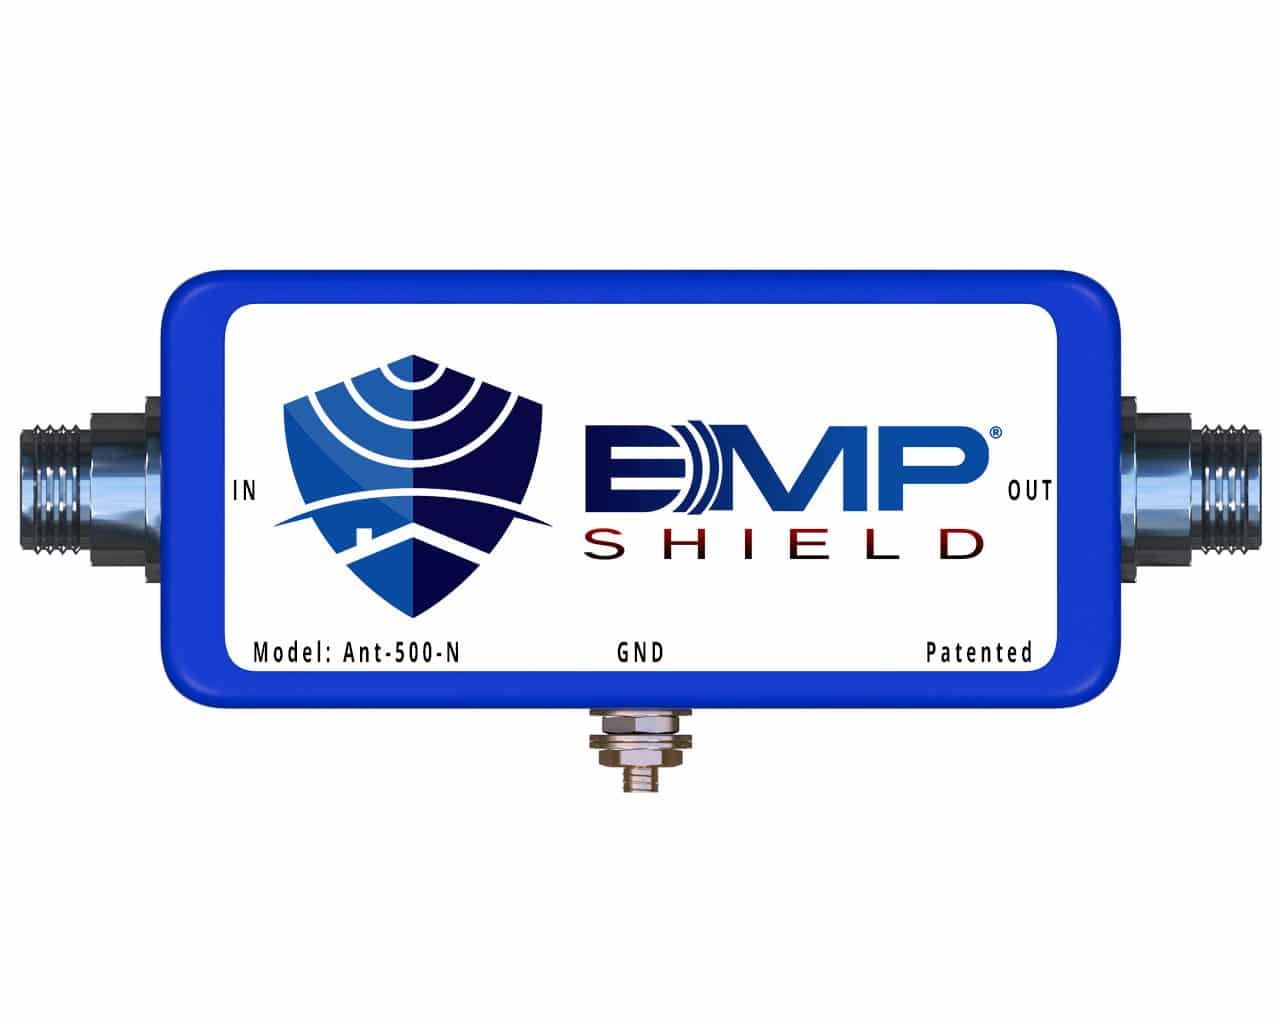 A blue box with the word EMP Shield on it, offering radio HF/VHF/UHF EMP protection up to 500 Watts with N-Connectors, available for shipping in 1-2 weeks